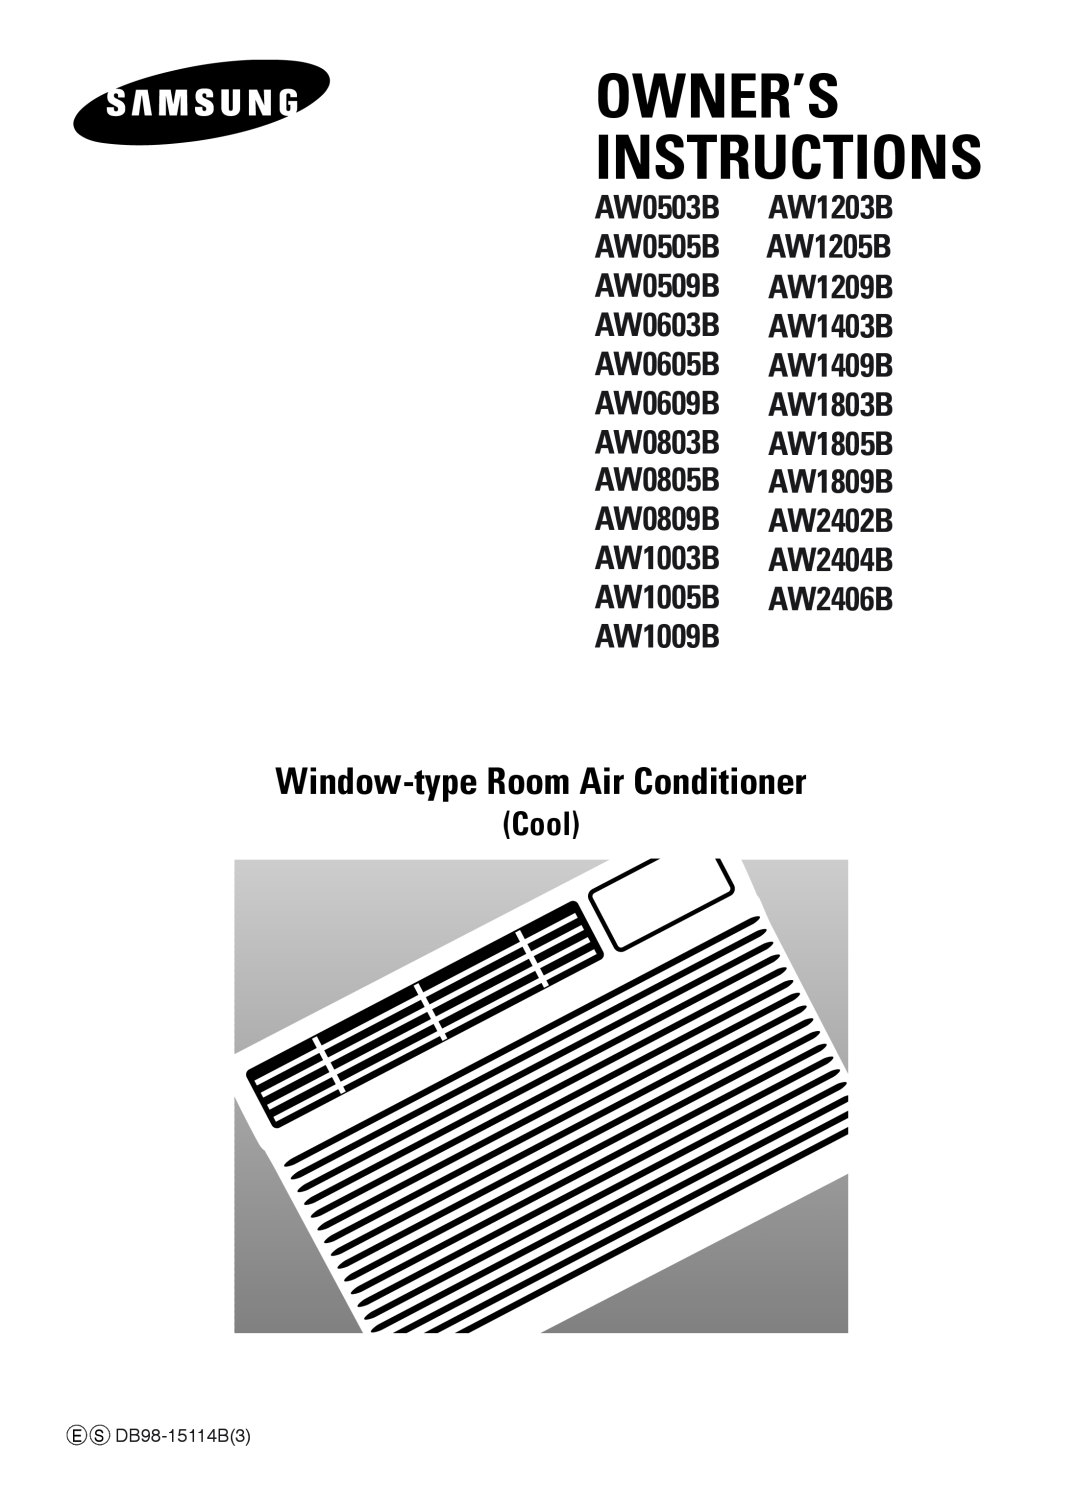 Samsung AW1403B manual Owner’S Instructions, Window-typeRoom Air Conditioner, AW1003B AW2404B AW1005B AW2406B AW1009B 